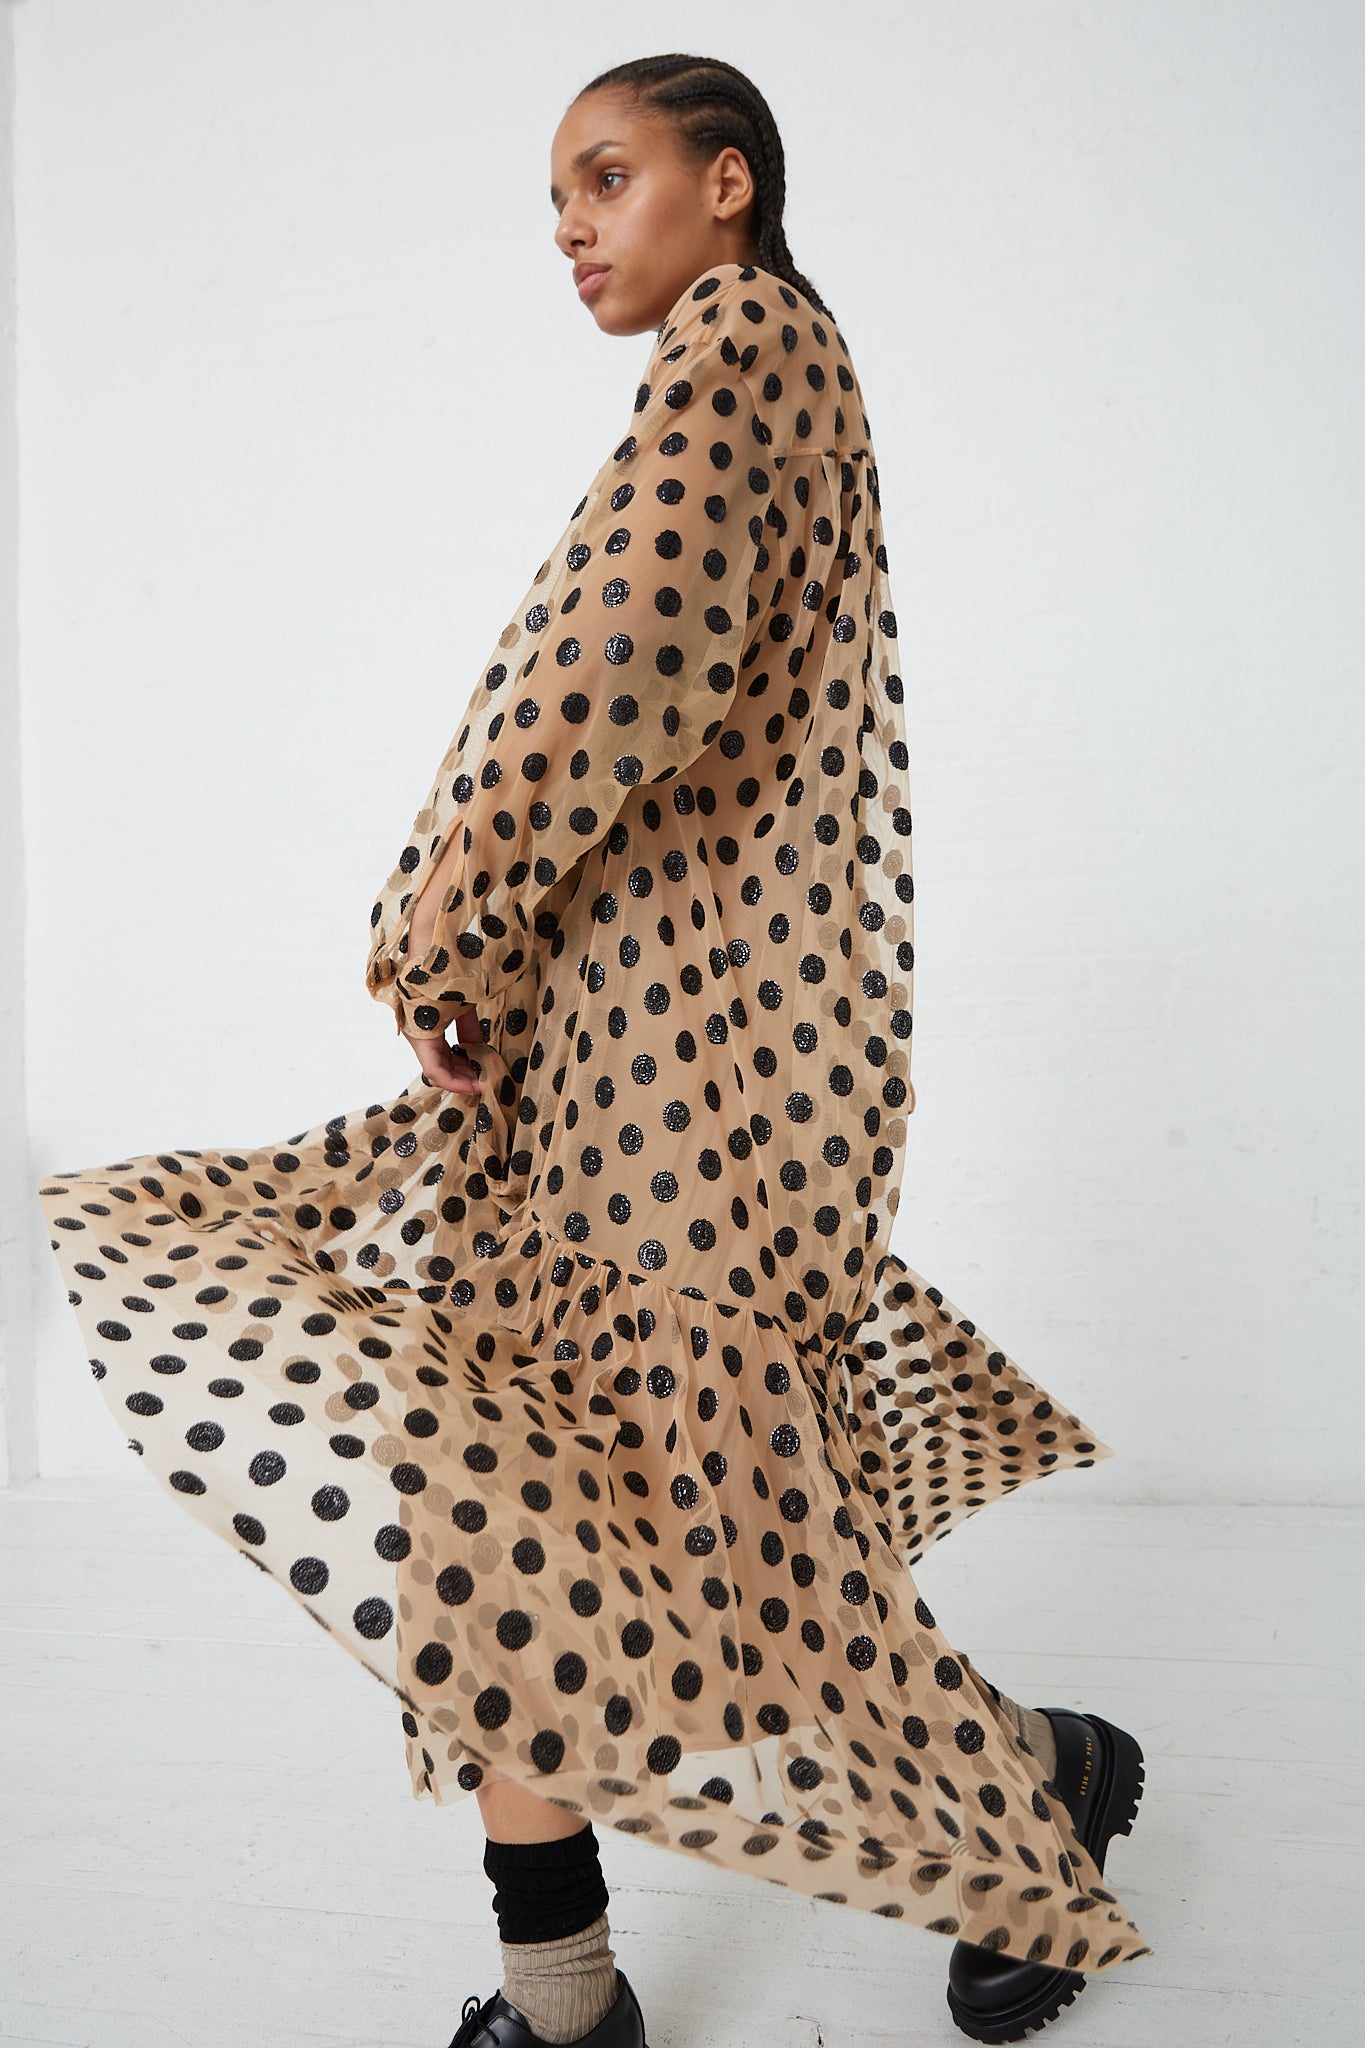 The model is wearing the Rachel Comey Sequin Dots Tulle Lanza Dress in Nude. Side view.